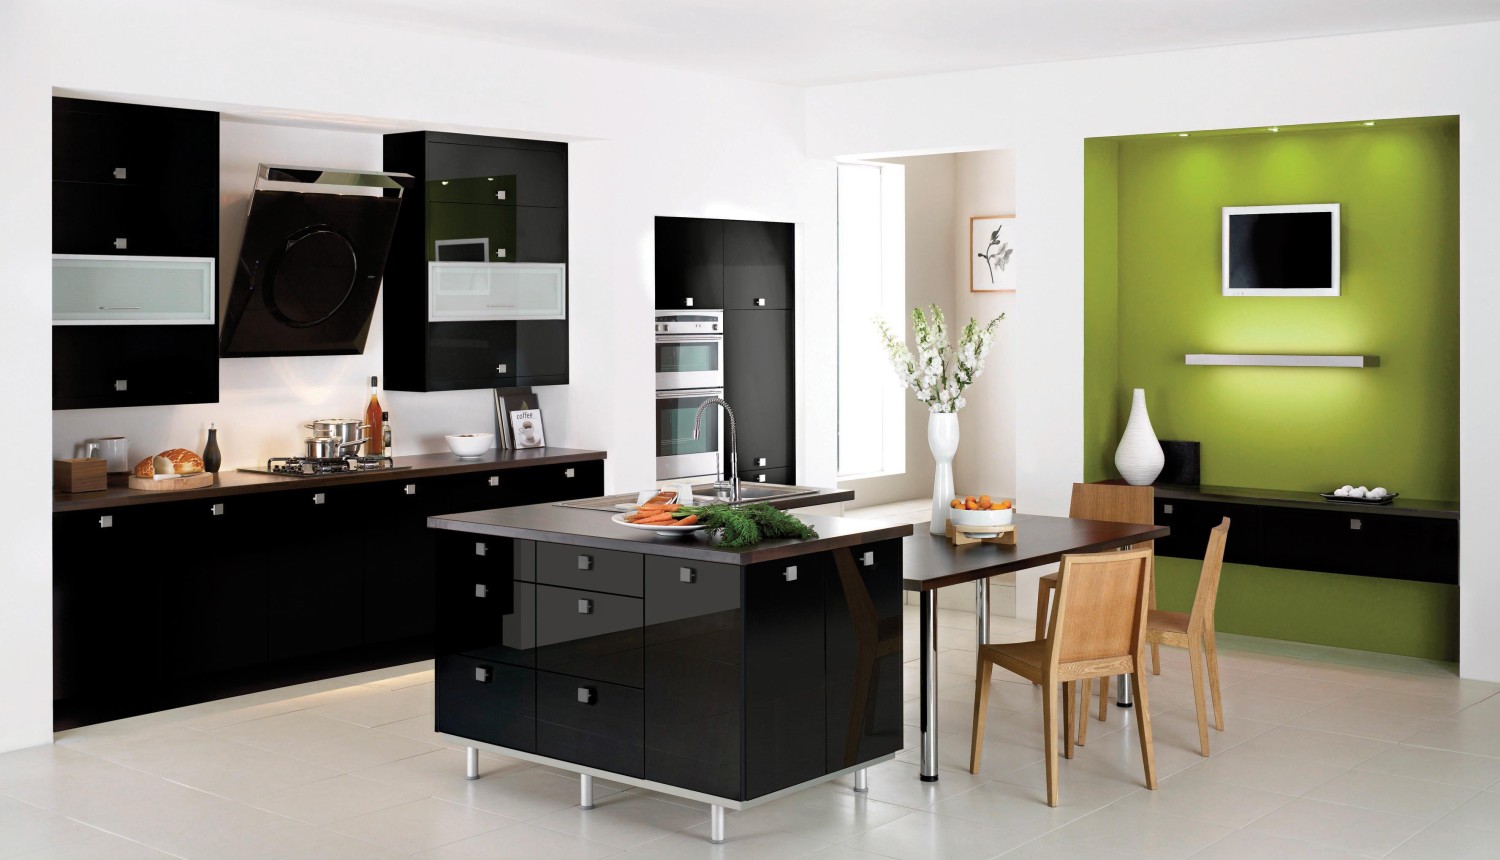 Black Kitchen 8 1500 x 860 The elegance and sophistication of black in modern and classic kitchen designs